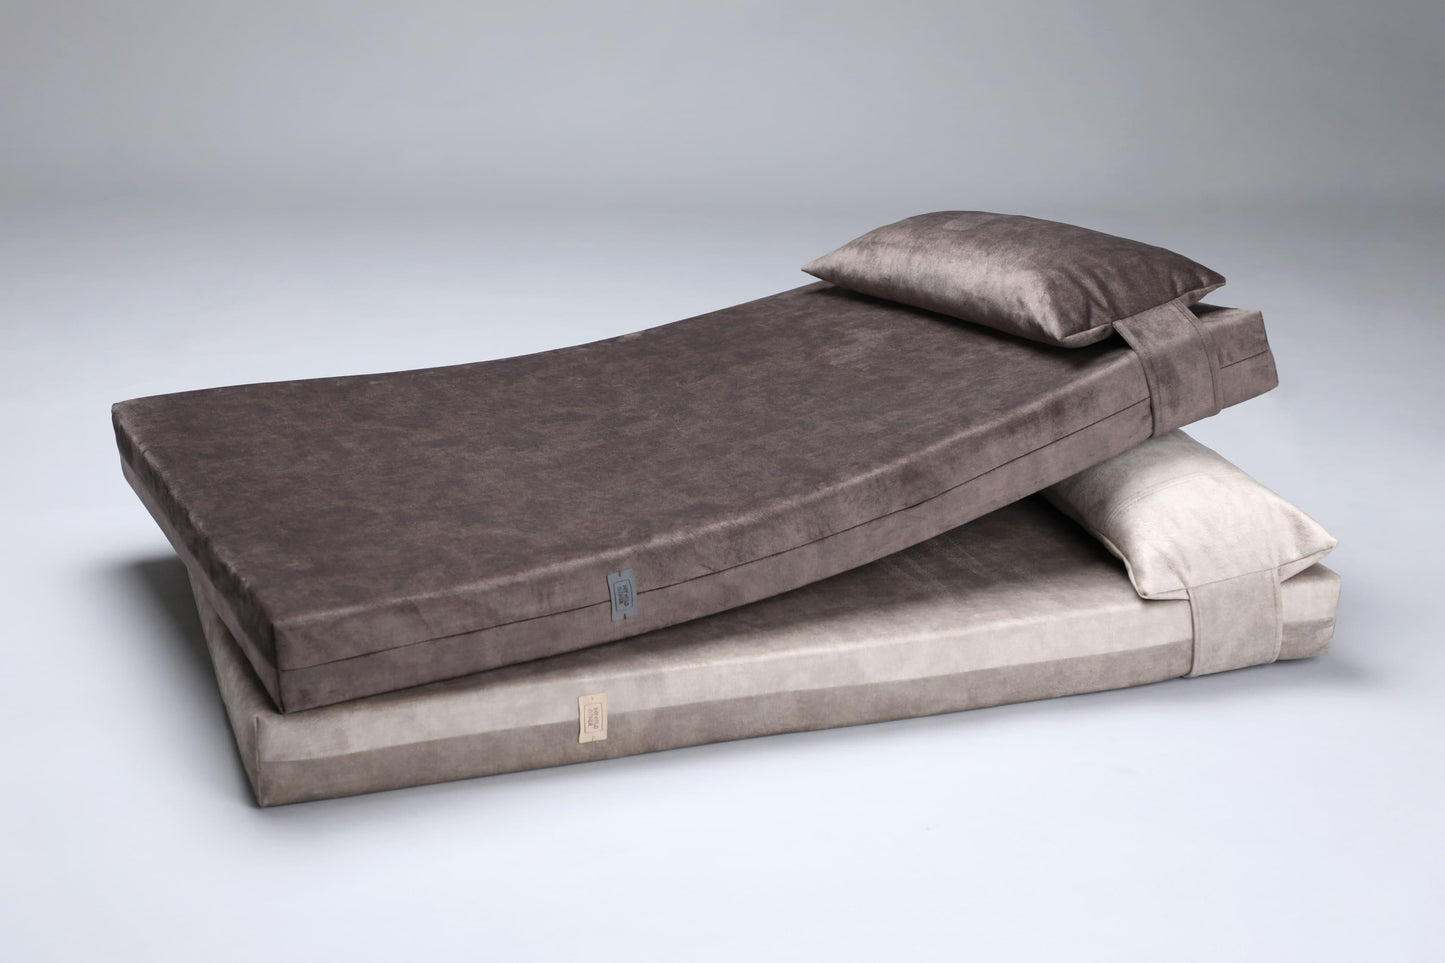 Dog bed for large dogs | Extra comfort & support | 2-sided | TAUPE - premium dog goods handmade in Europe by My Wild Other